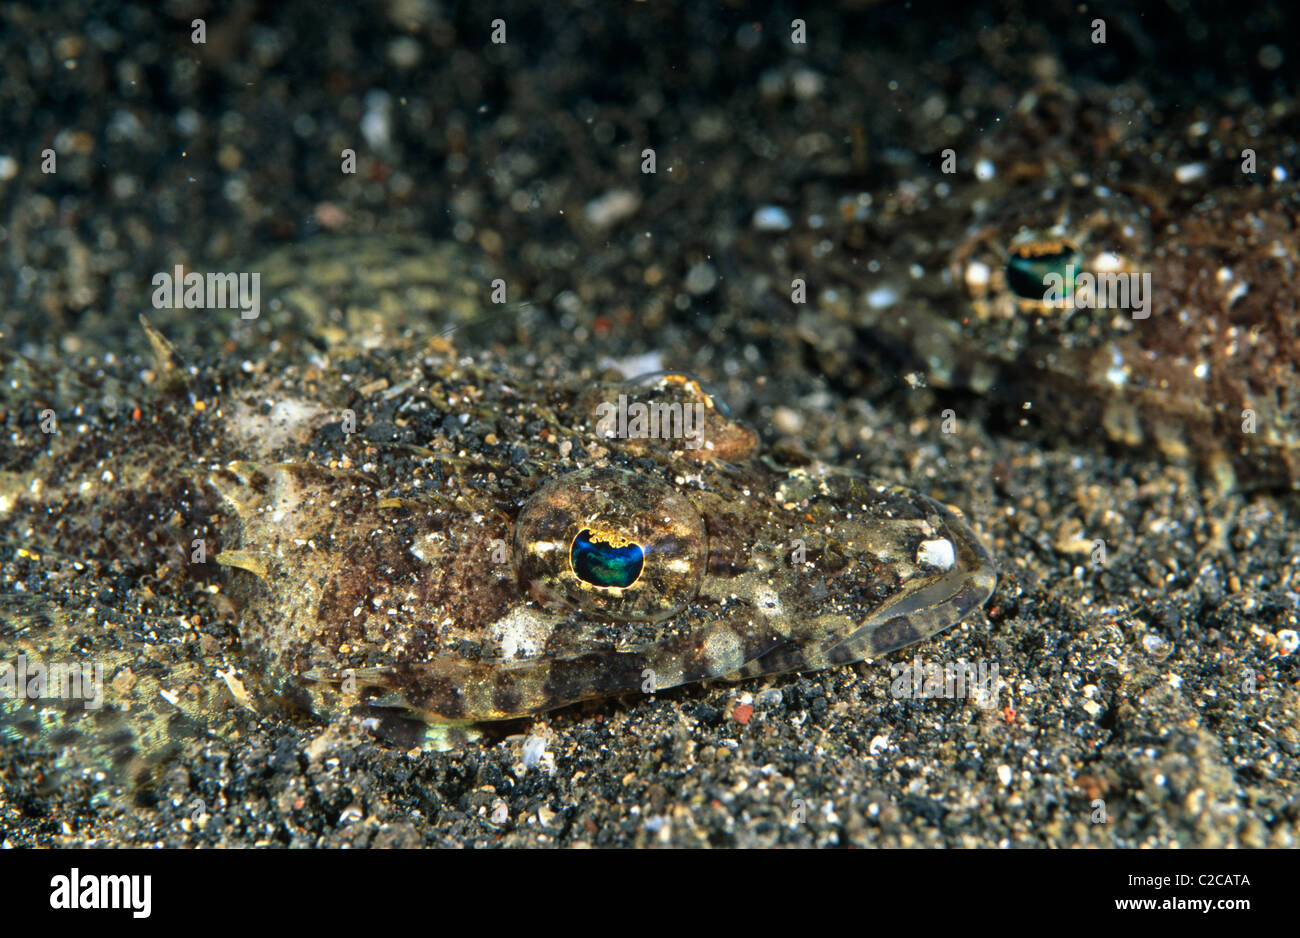 Pair of Celebes Flathead, Thysanophrys celebicus, buried in sand, Lembeh Straits, near Bitung, Sulawesi, Indonesia, Asia Stock Photo